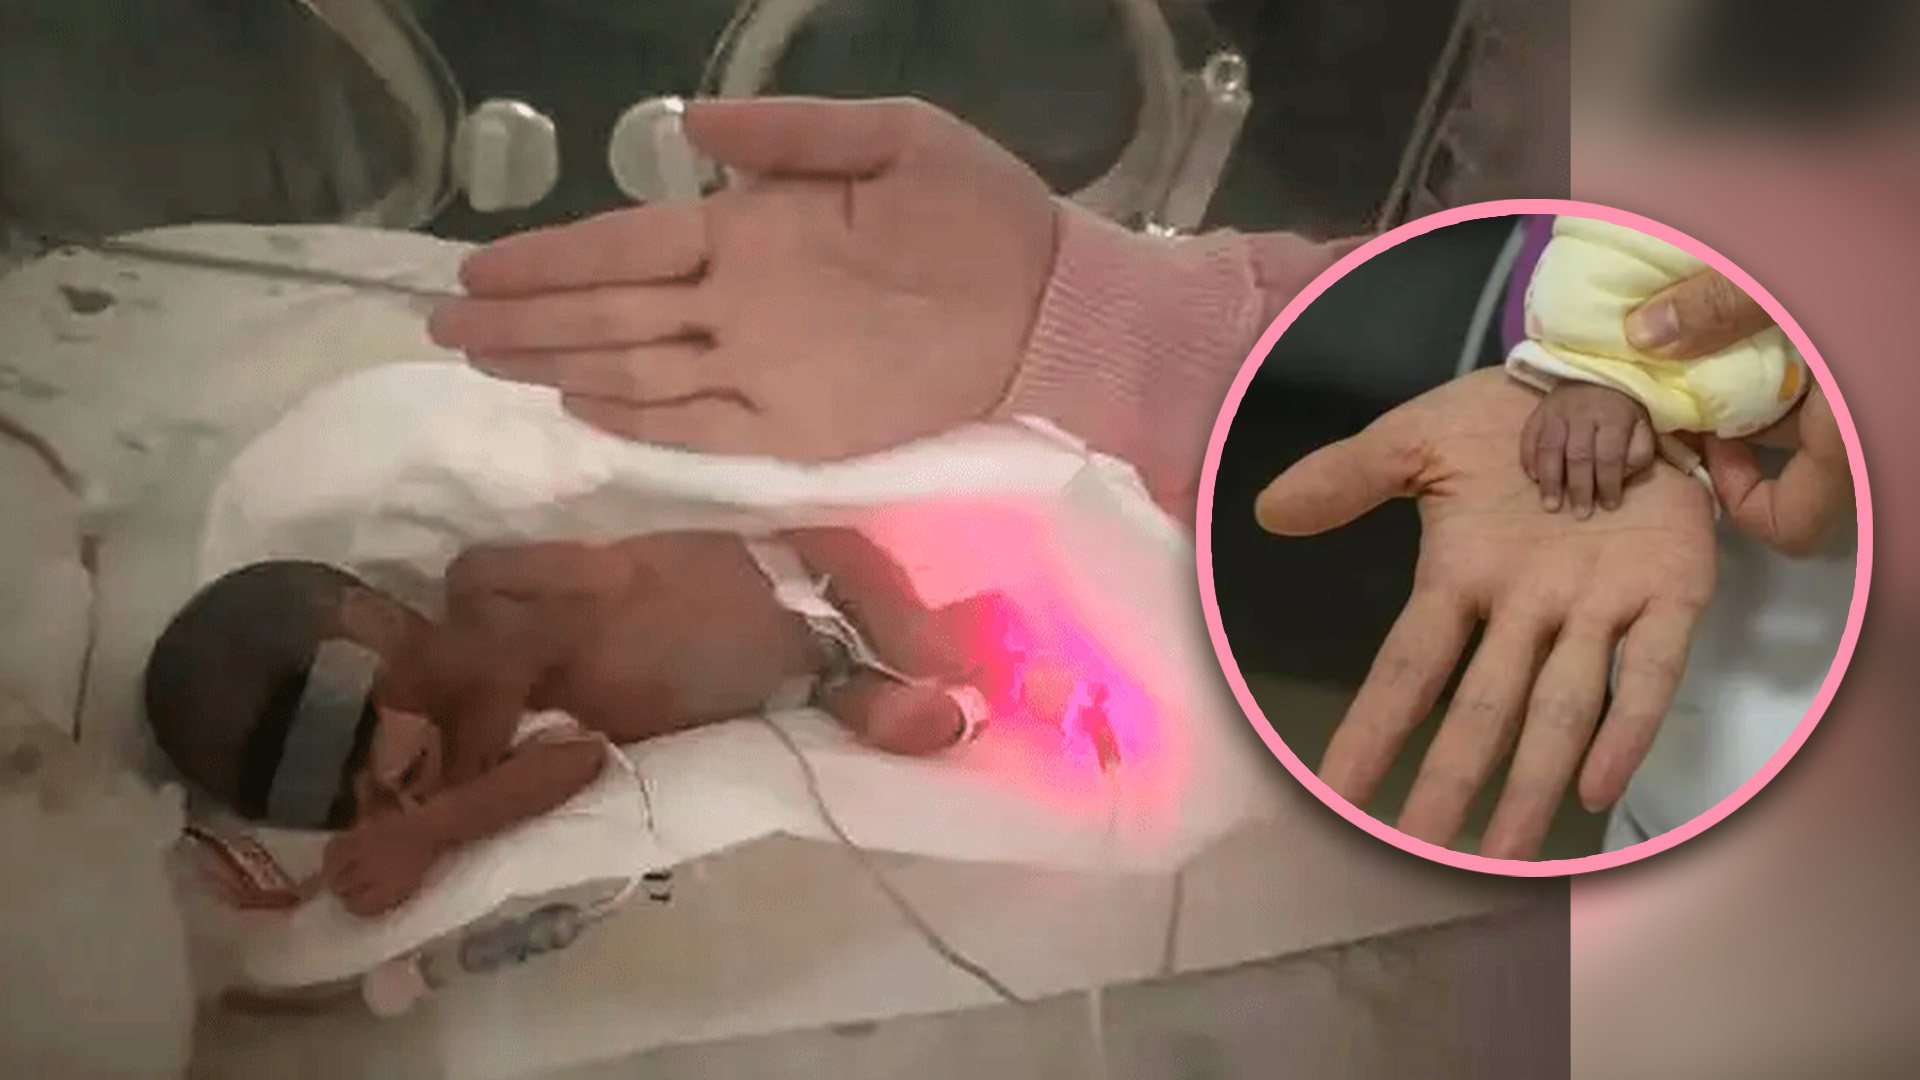 A premature baby girl in China, who was born no bigger than the size of an adult hand, has been discharged from hospital after 112 days of intensive care. Photo: SCMP composite/Baidu/Weibo